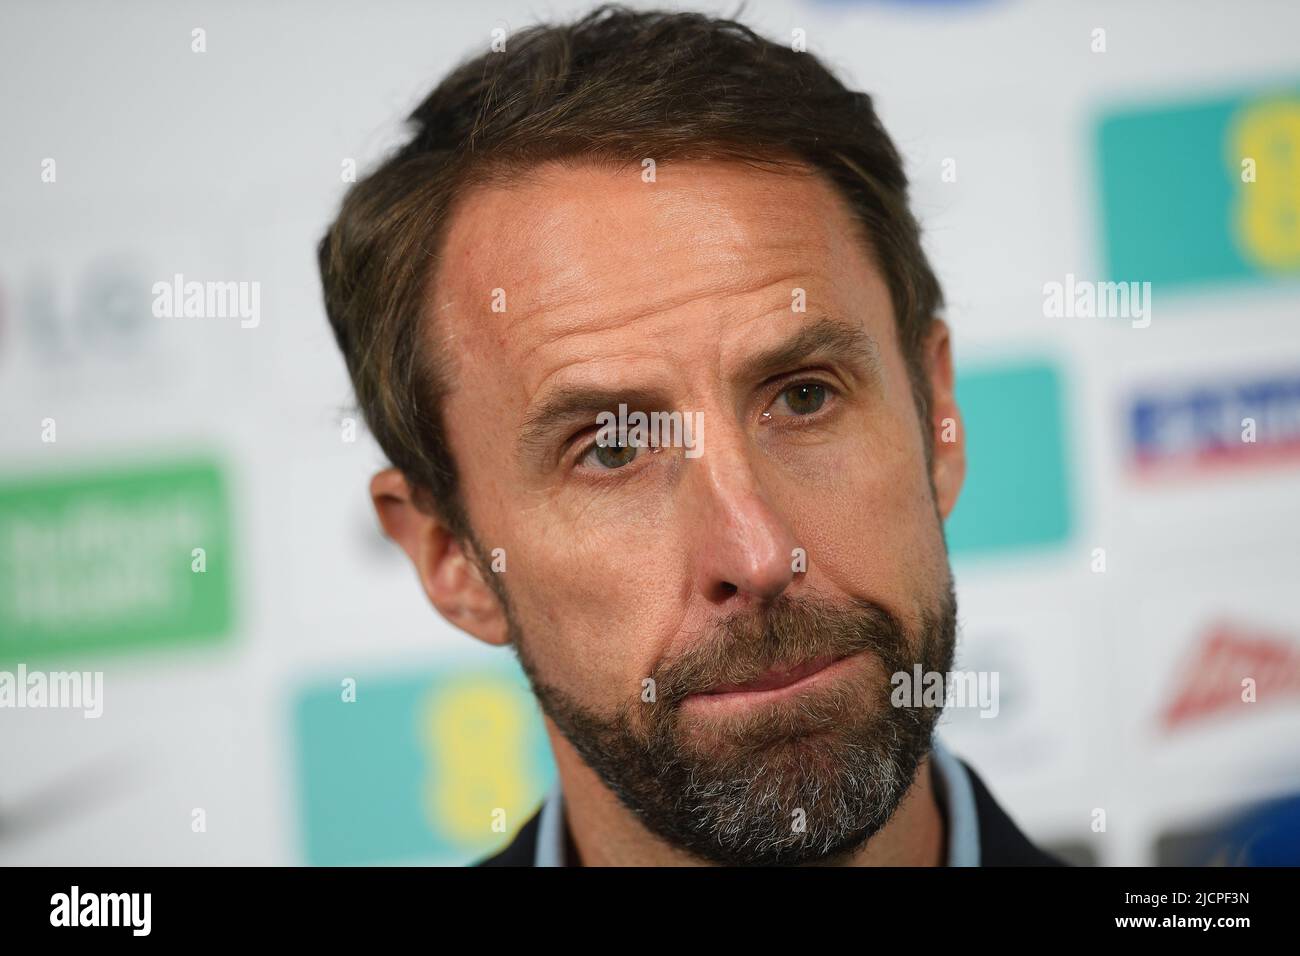 14 Jun 2022 - England v Hungary - UEFA Nations League - Group 3 - Molineux Stadium  England Manager Gareth Southgate after the 0-4 defeat to Hungary in the UEFA Nations League. Picture Credit : © Mark Pain / Alamy Live News Stock Photo